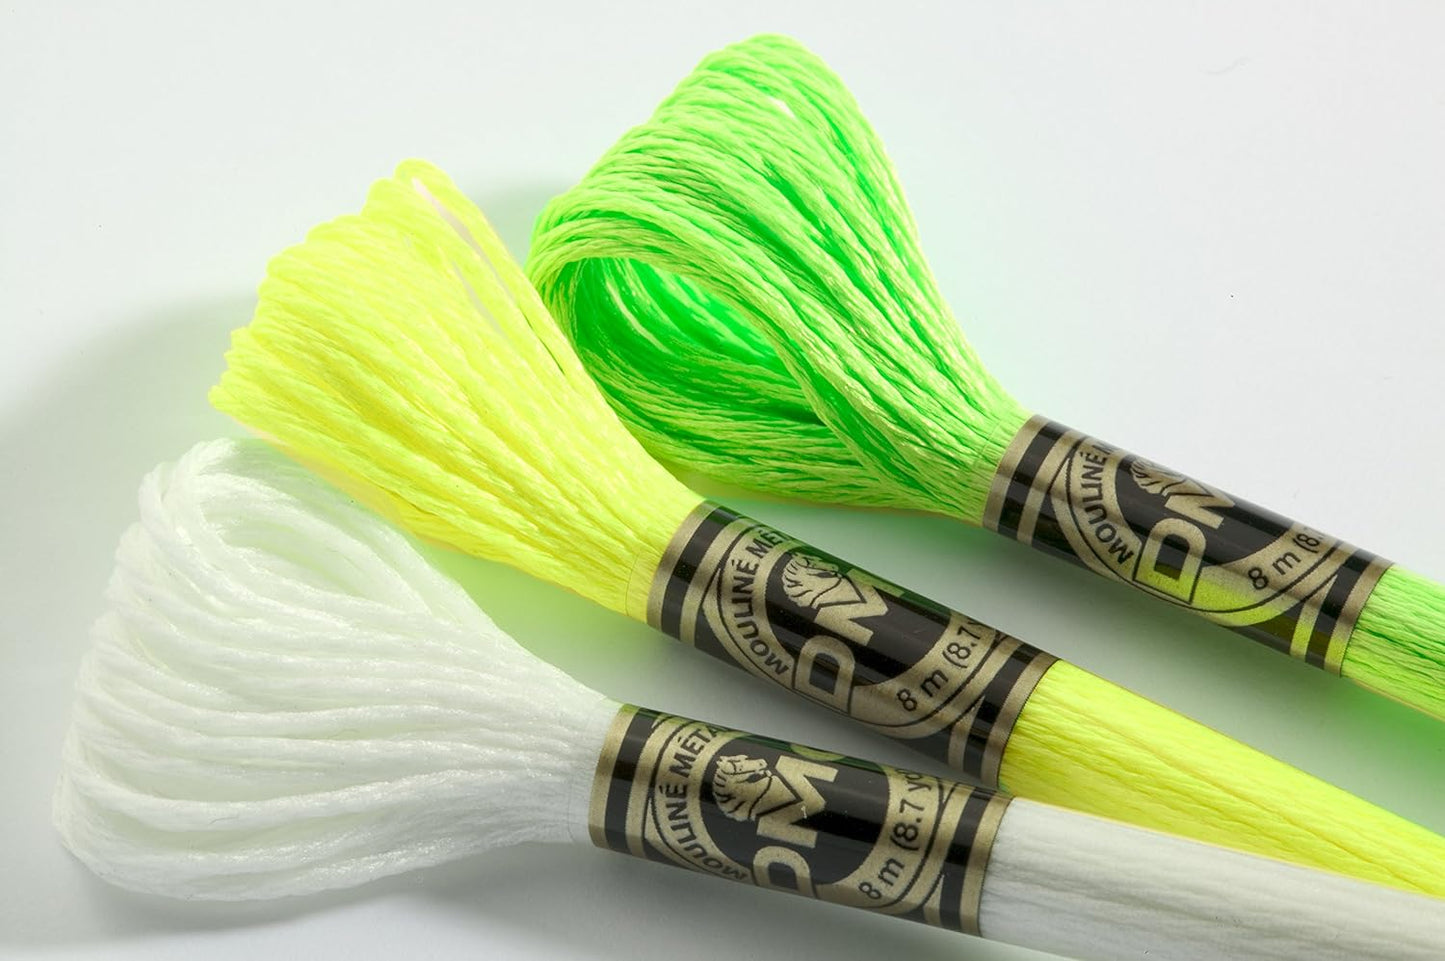 317W-E940 Light Effects Polyster Embroidery Floss, 8.7-Yard, Glow-In-The-Dark